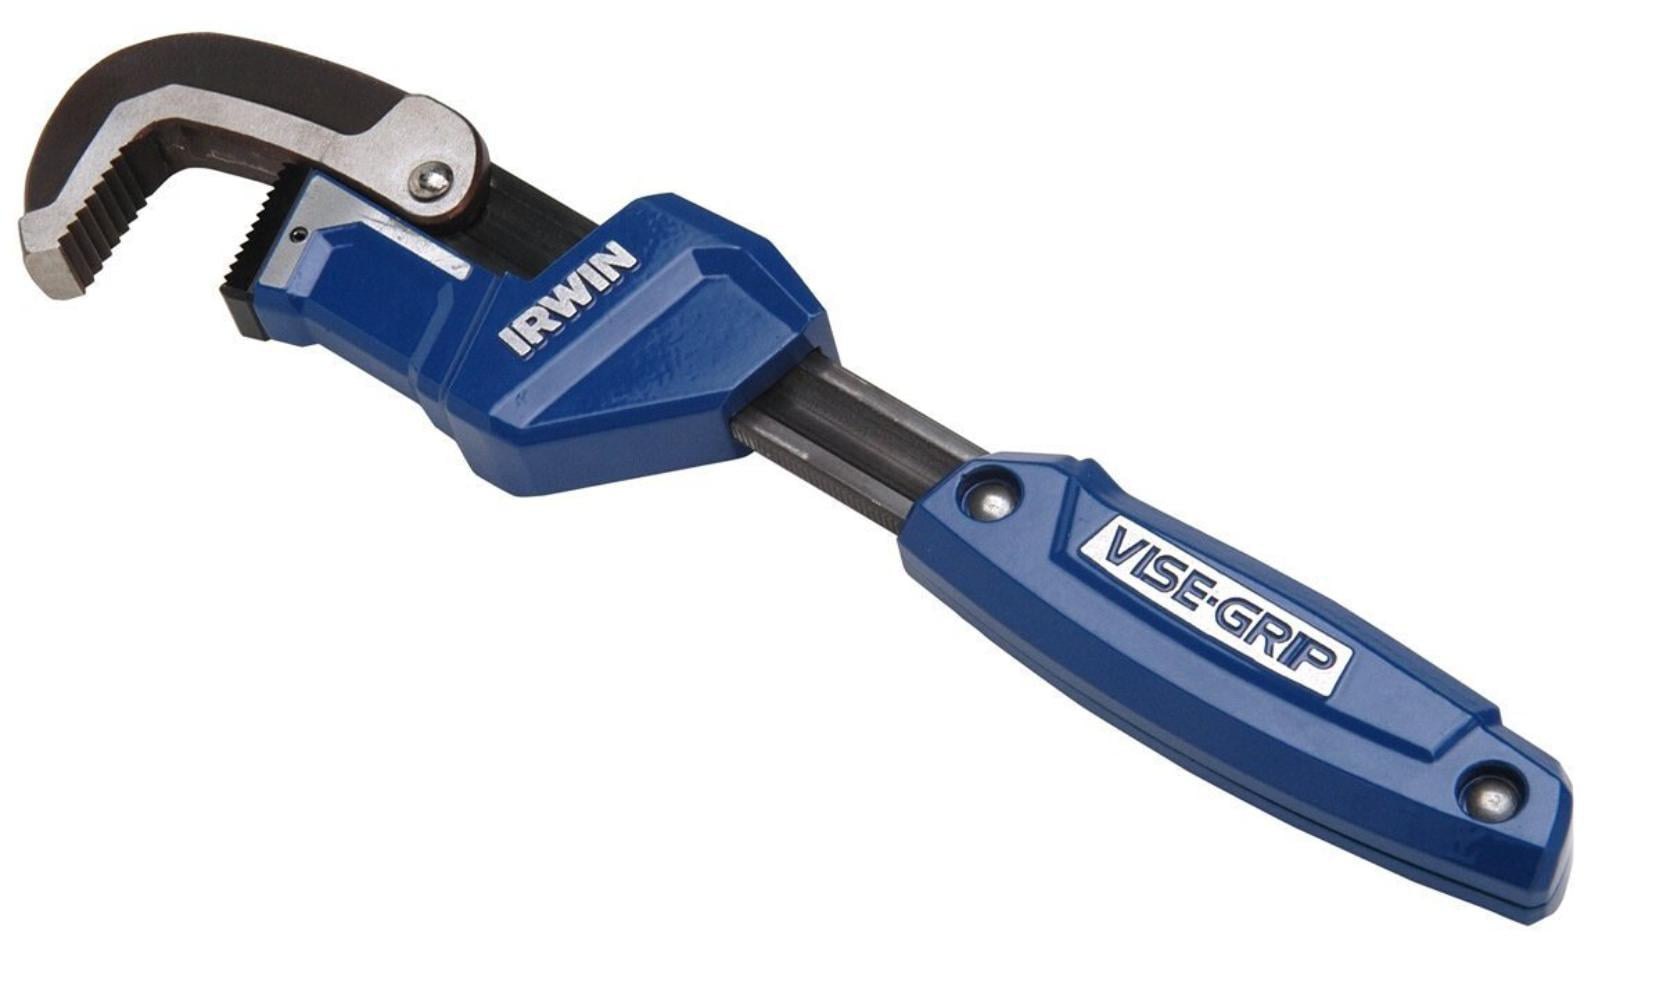 Irwin GIDDS2-286372 Vise Grip 1 Jaw Capacity 6 Adjustable Wrench with Comfort Grip 